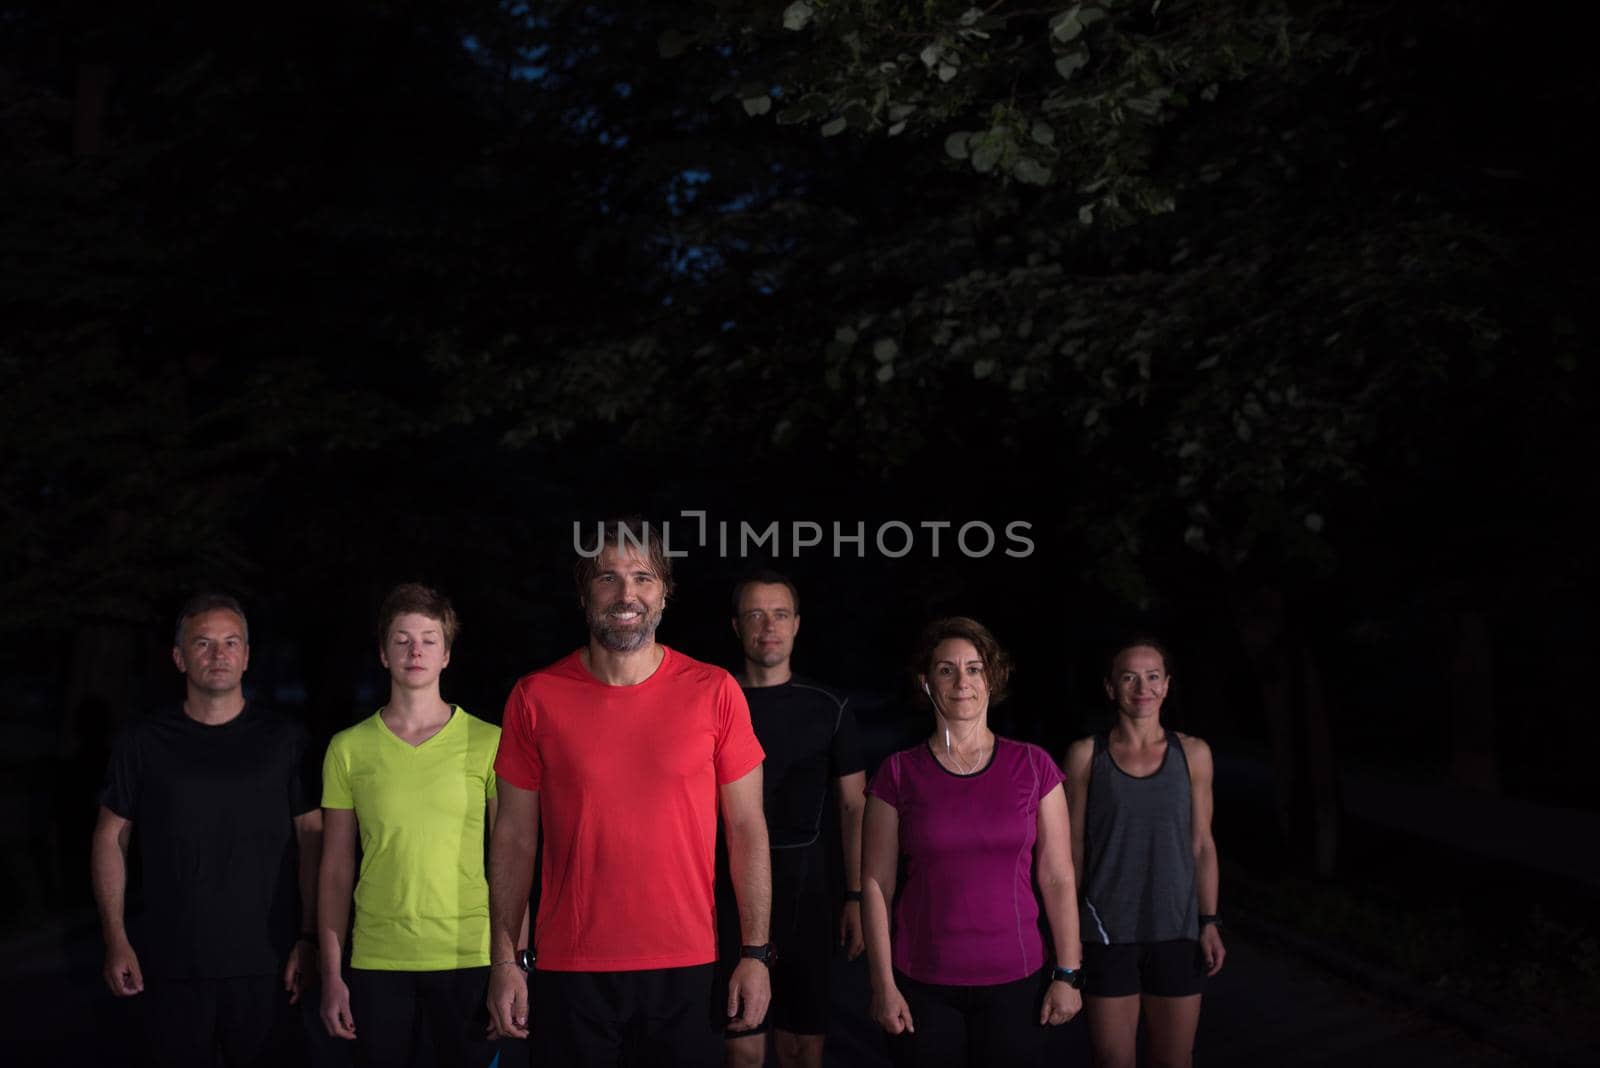 runners team on the night training by dotshock